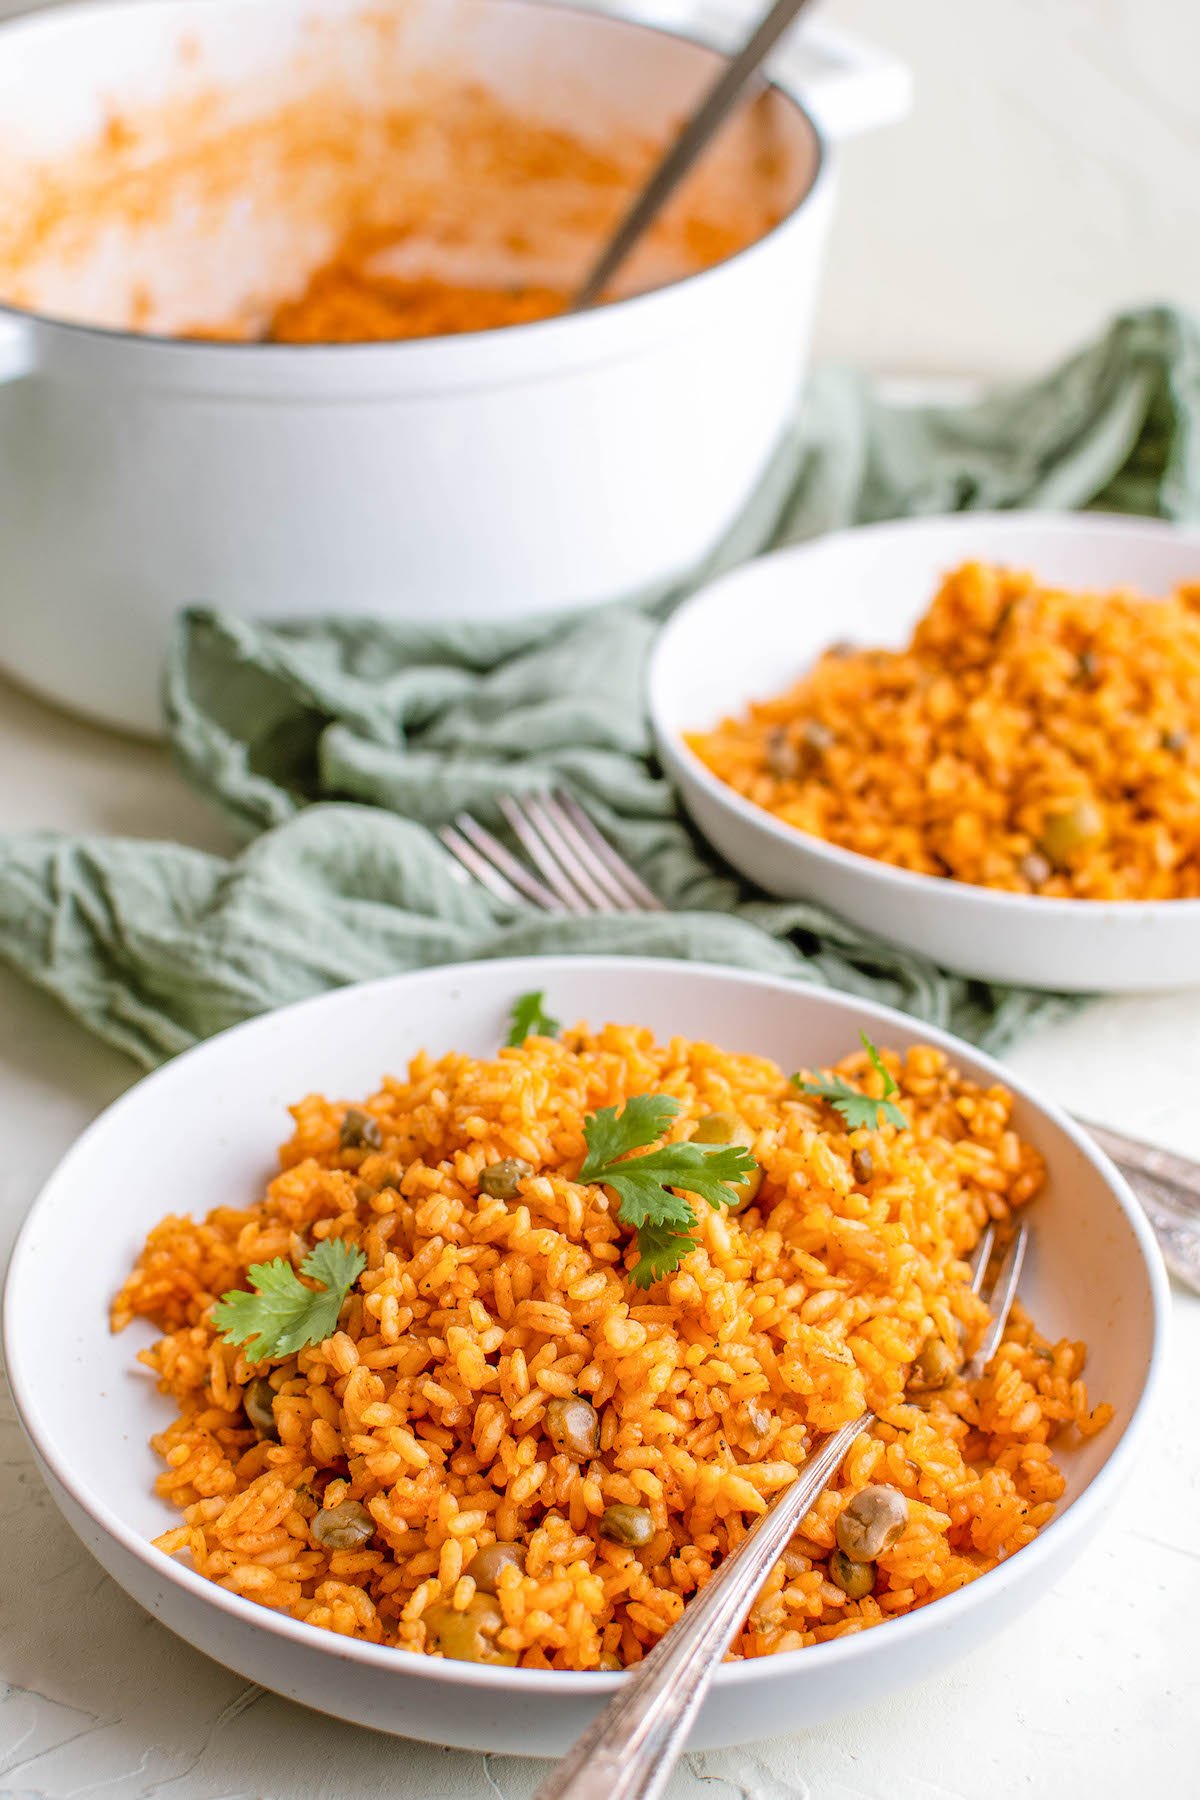 Two bowls of Puerto Rican rice with pigeon peas and a fork inserted in one bowl ready to take a bite.